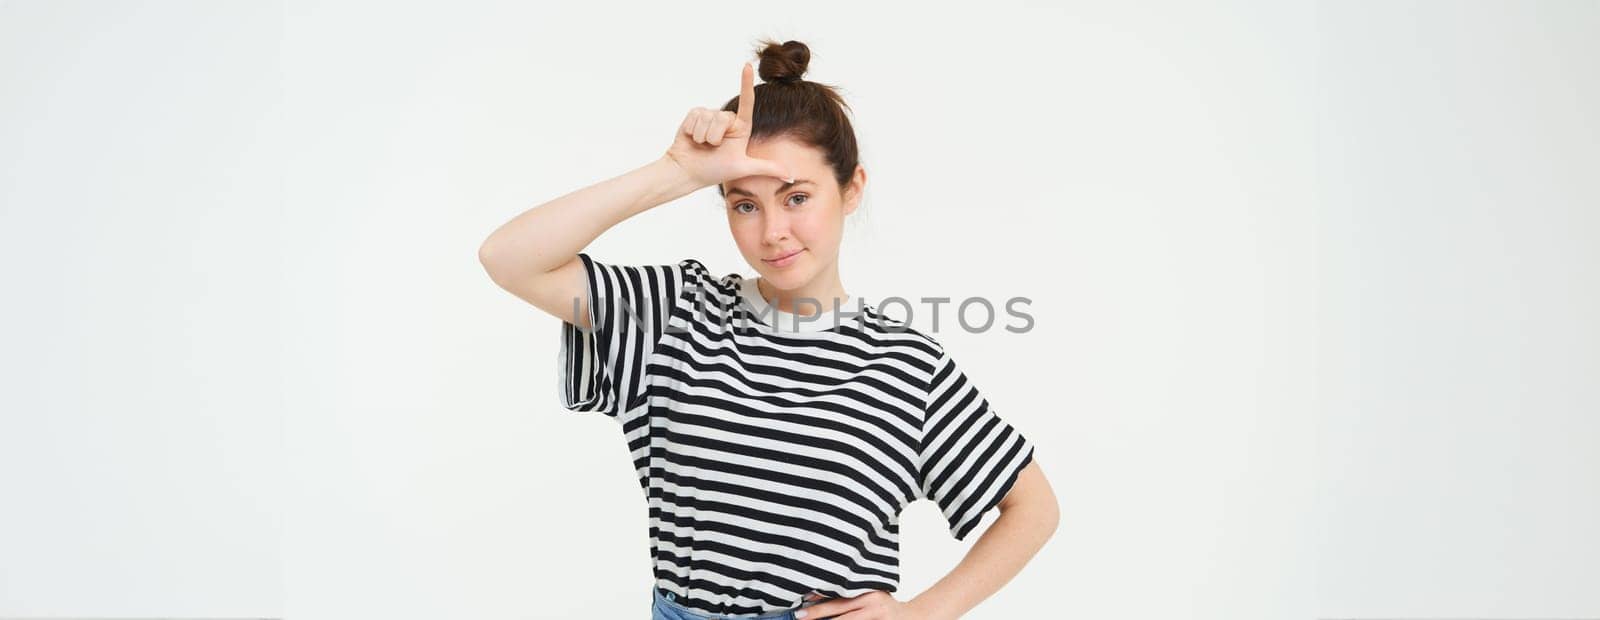 Portrait of brunette woman shows l letter on forehead, mocking someone, calling person a loser, standing over white background.